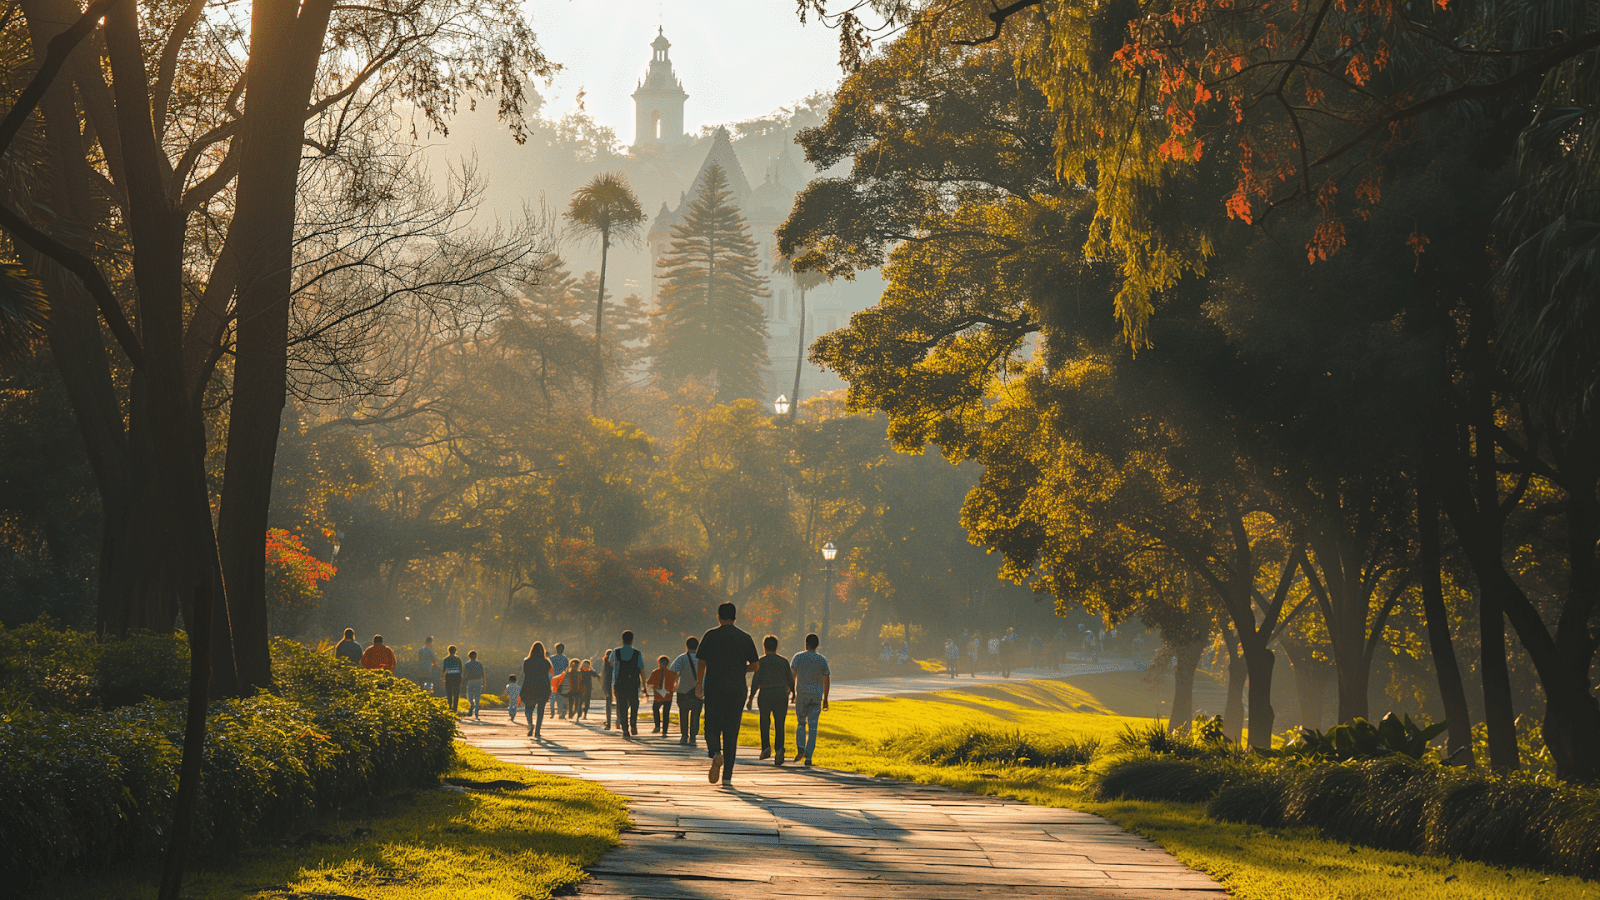 People walking in a lush green park near Mexico City under a golden sunrise